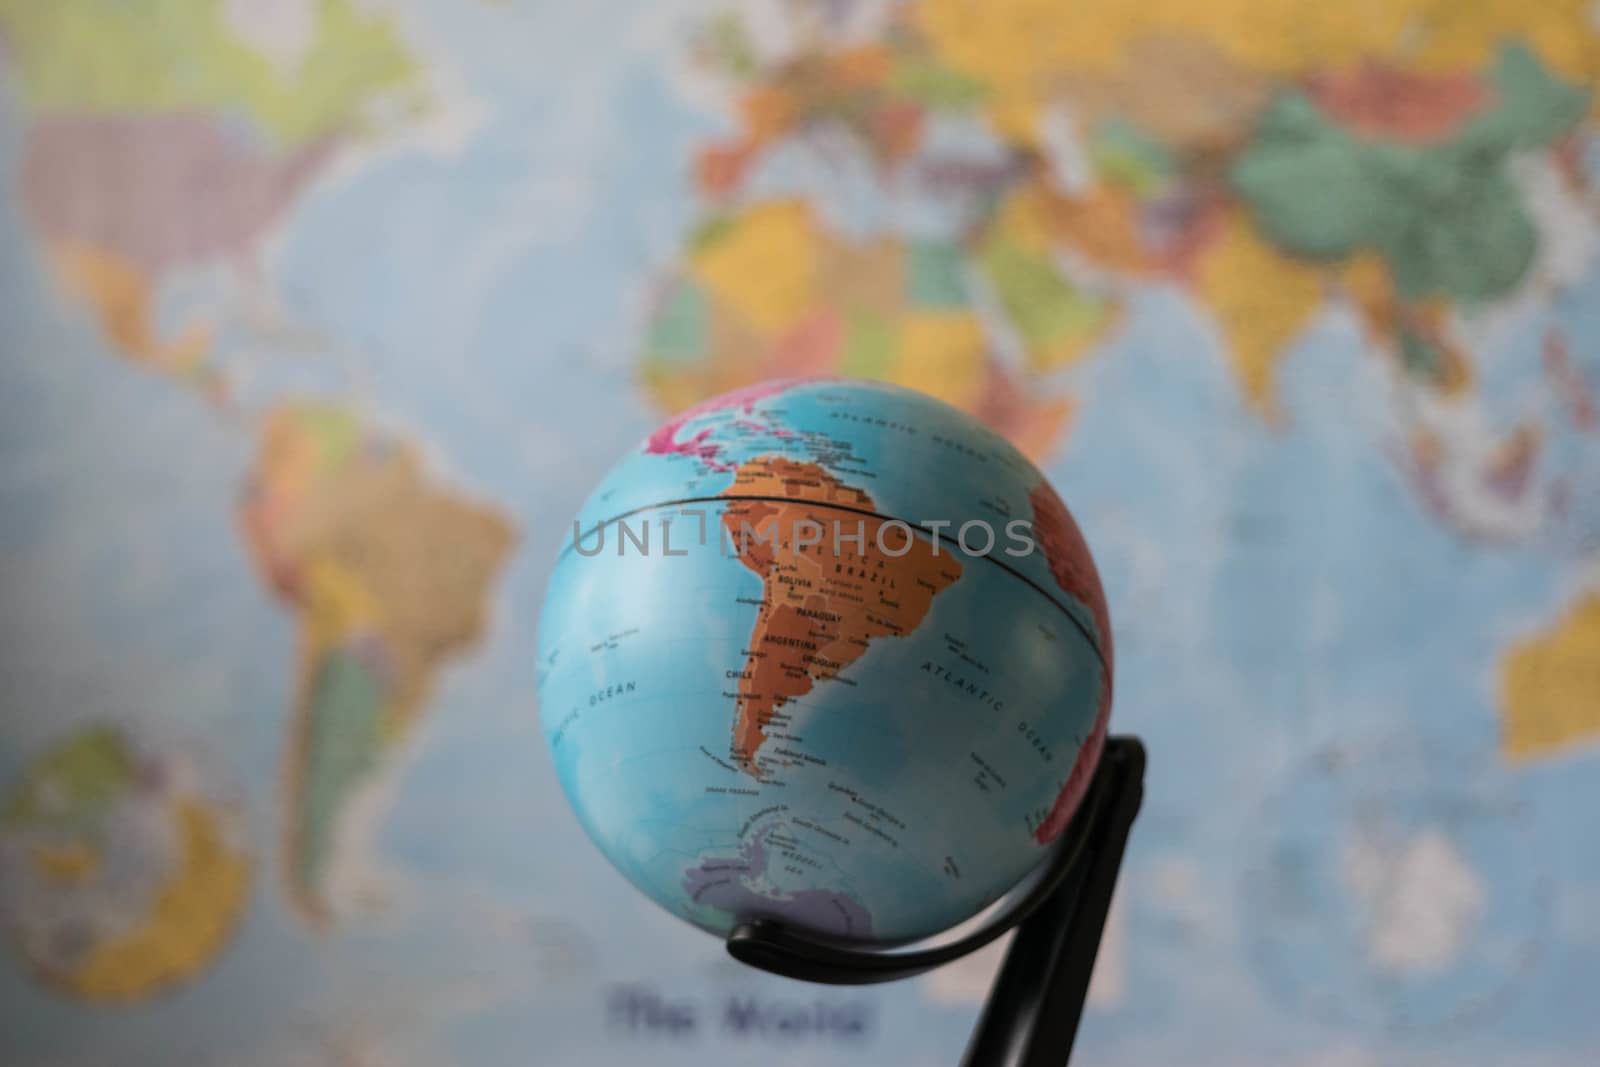 South America map on a globe with the whole world as background